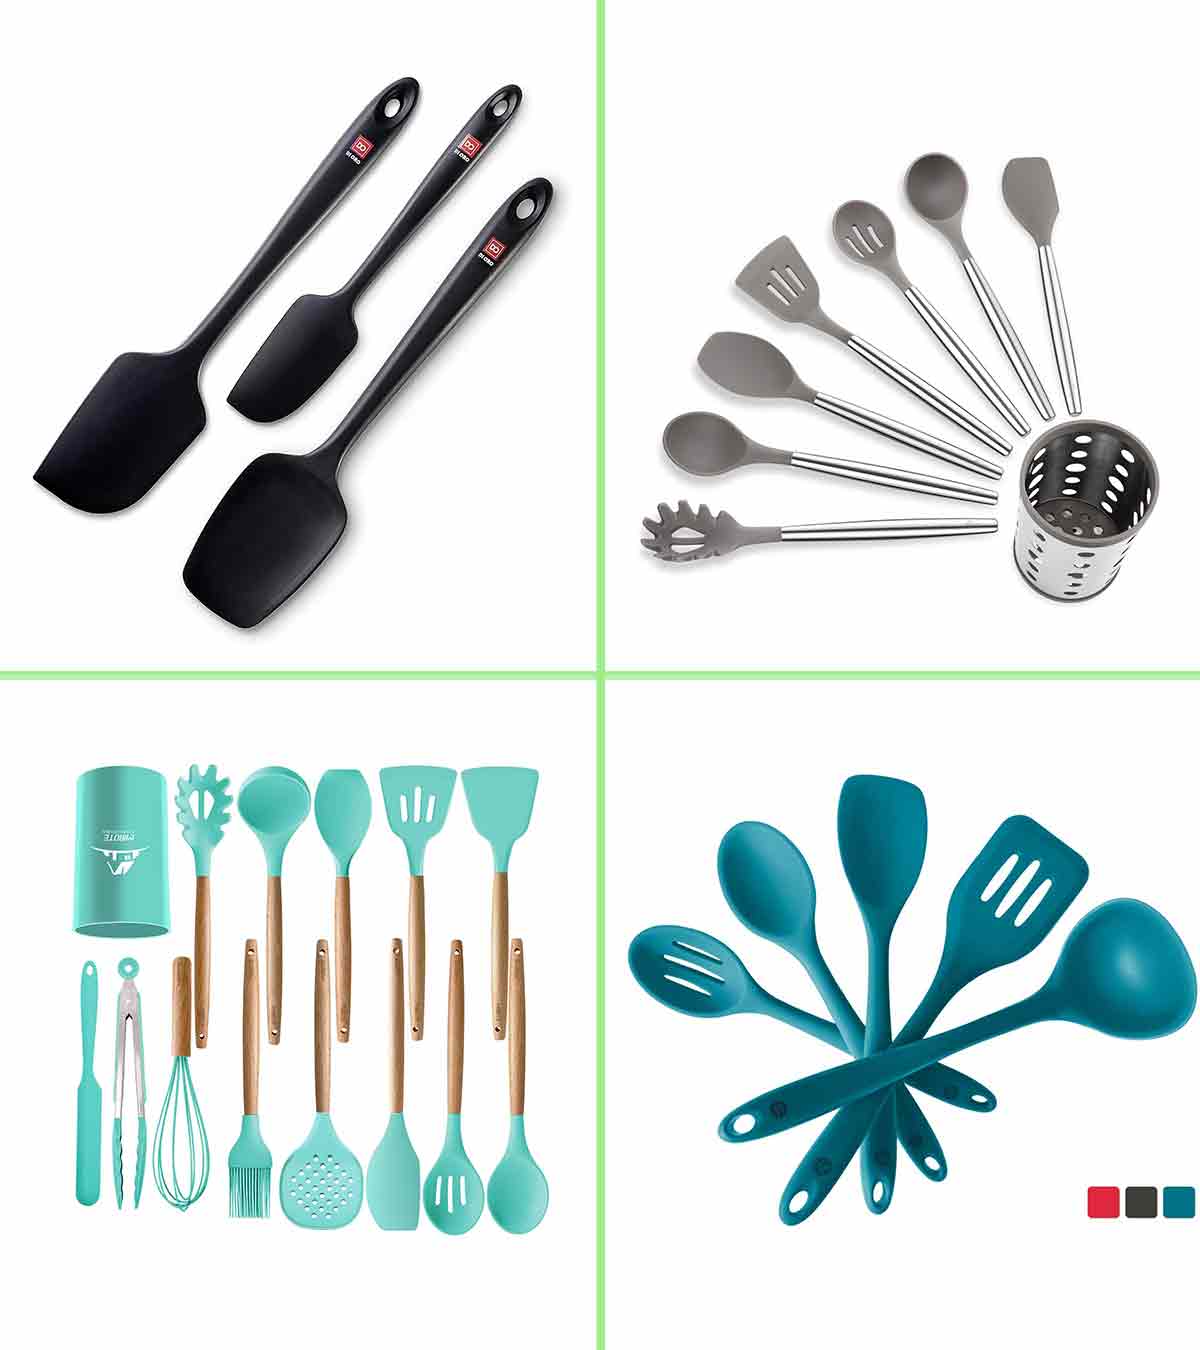 https://www.momjunction.com/wp-content/uploads/2020/06/13-Best-Silicone-Cooking-Utensils-This-Year-2.jpg